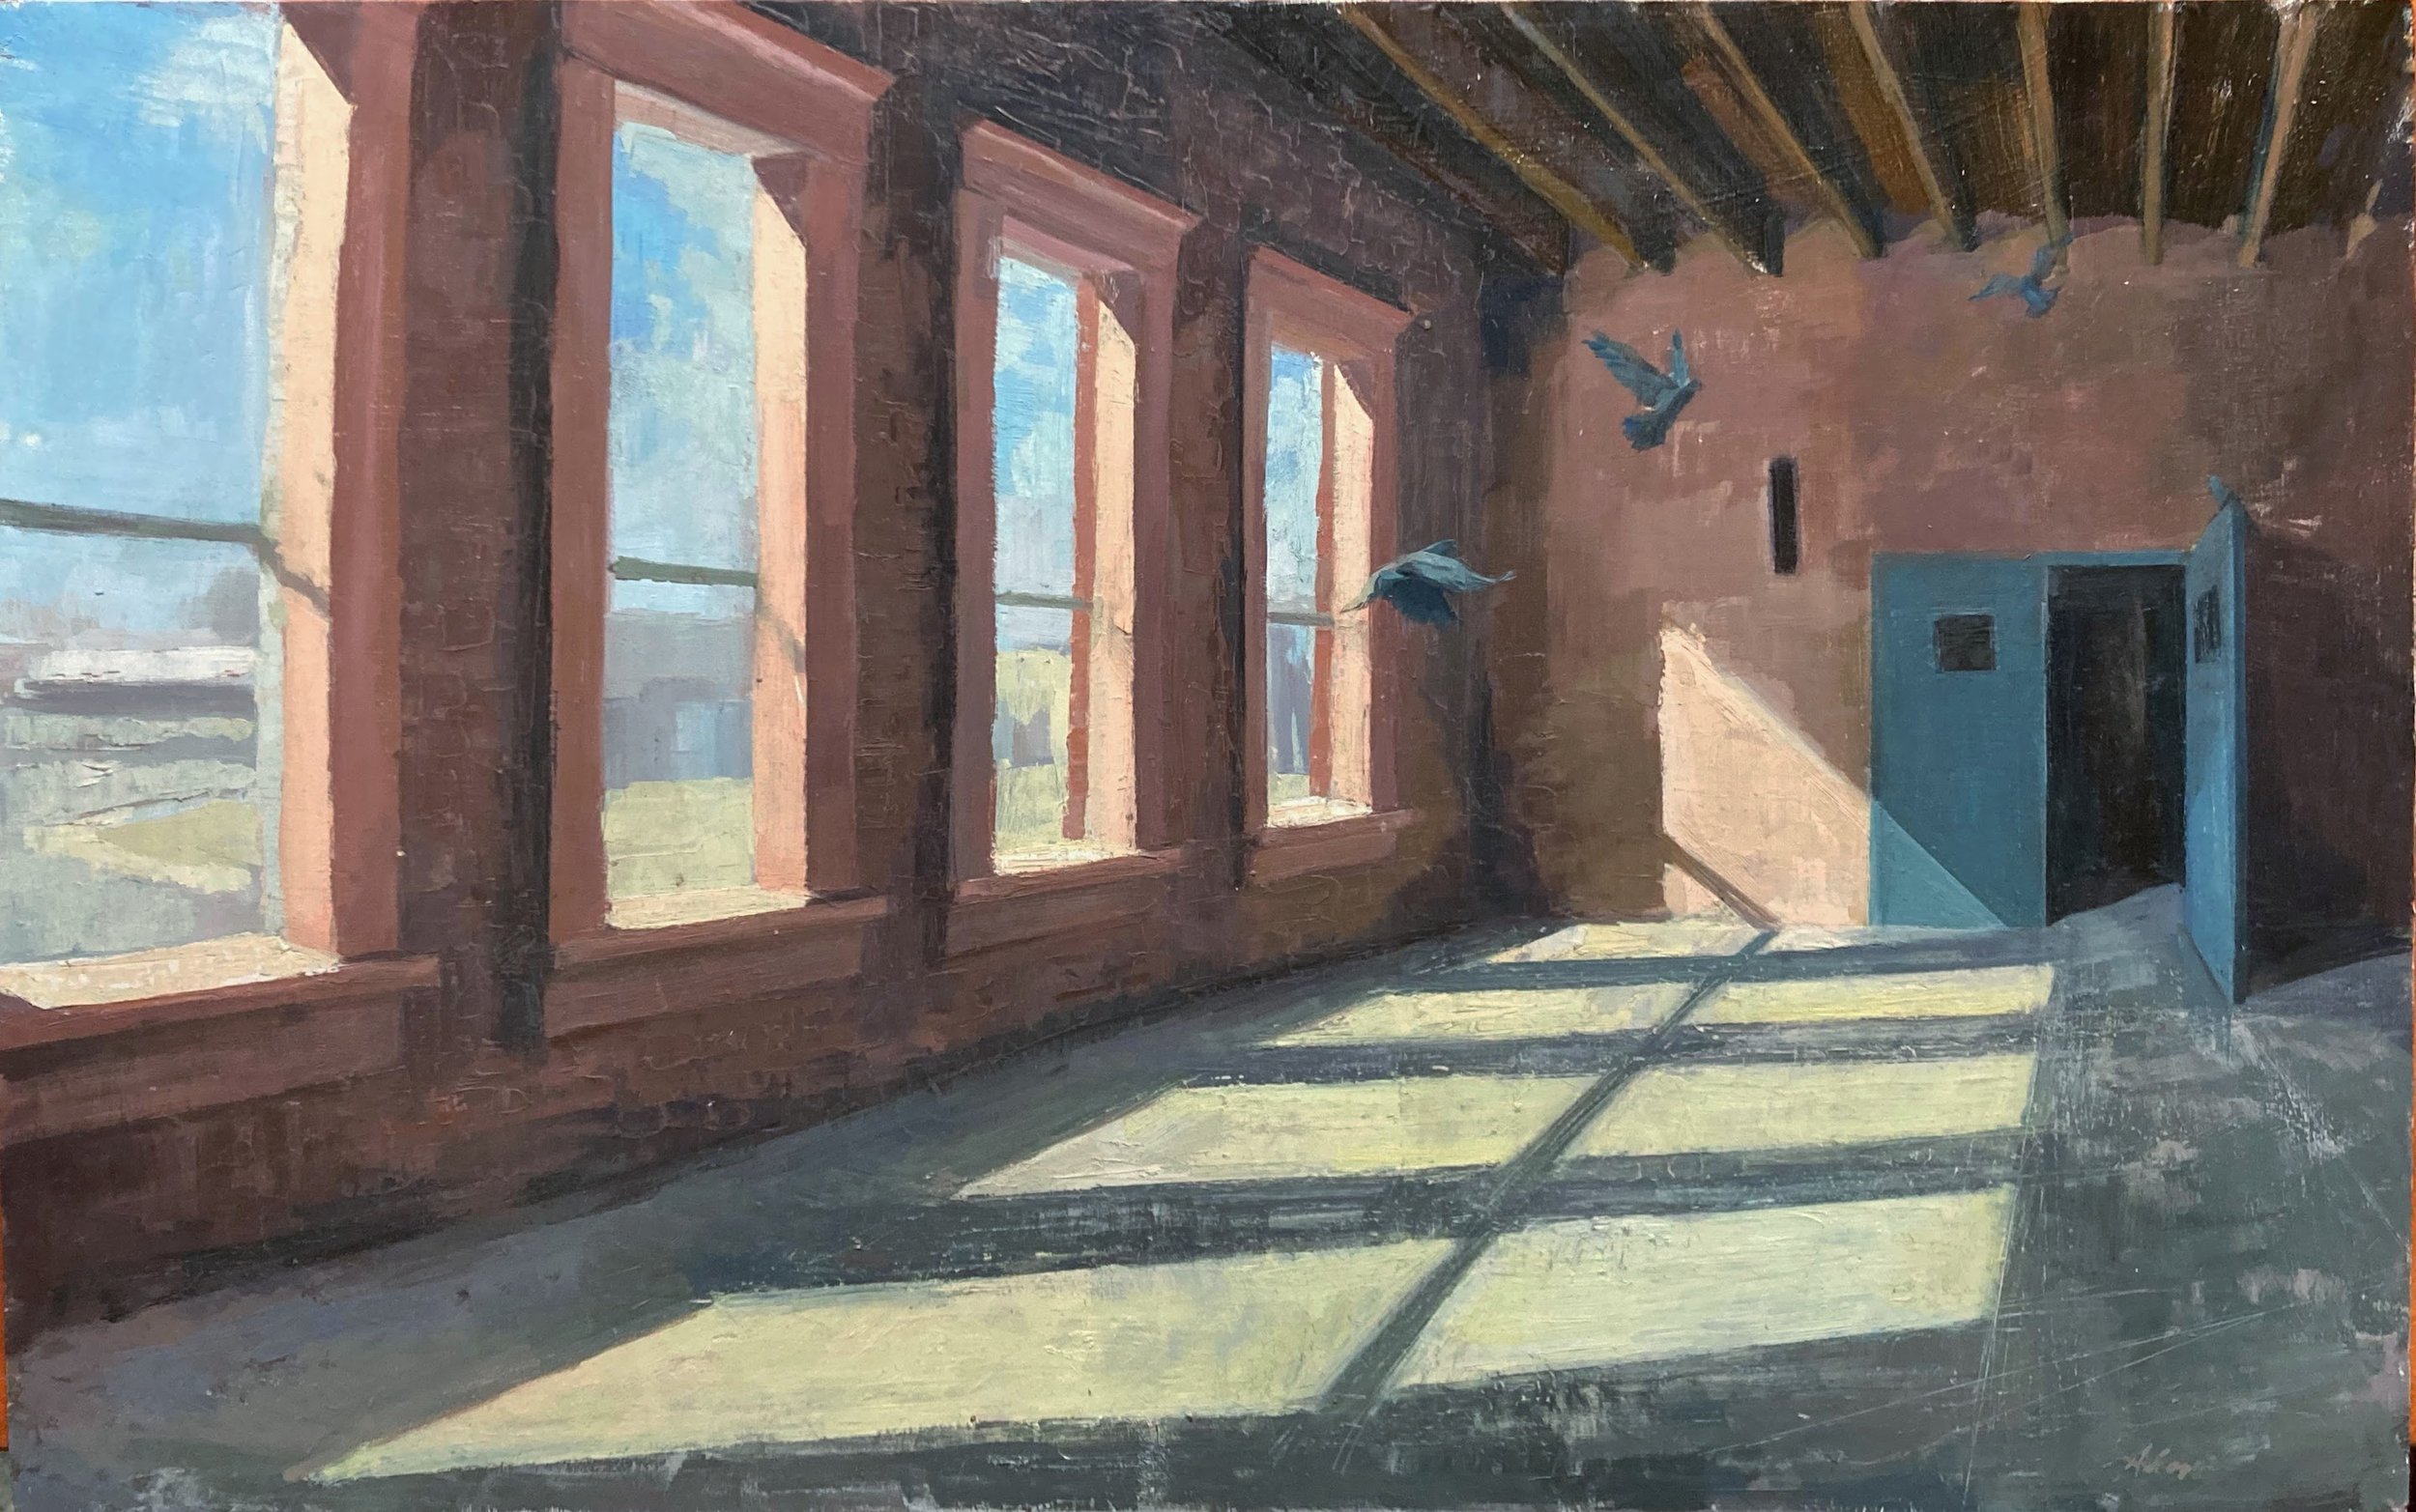    The New Tenants  , 20” x 31”, oil on canvas 